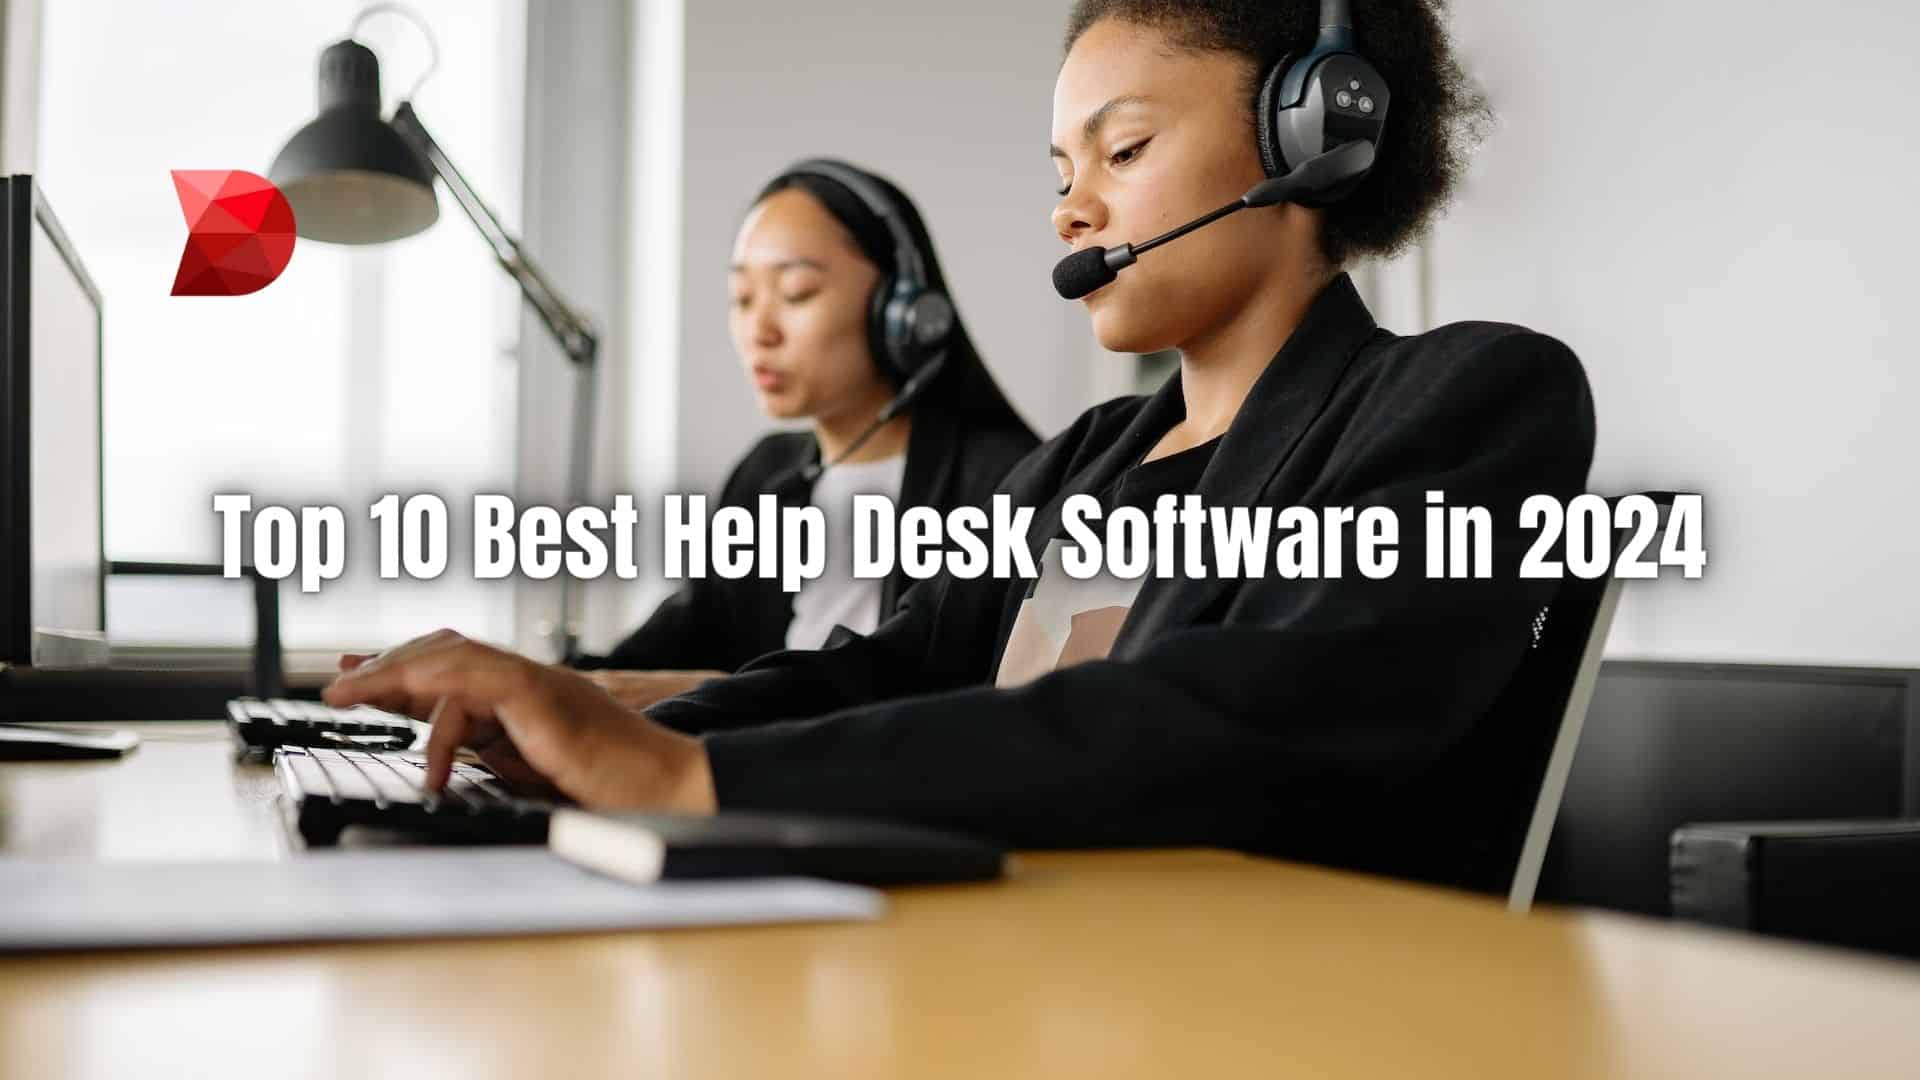 This article will discuss help desk and share some of the best help desk software in 2024 and see how they compare. Read here to learn more.